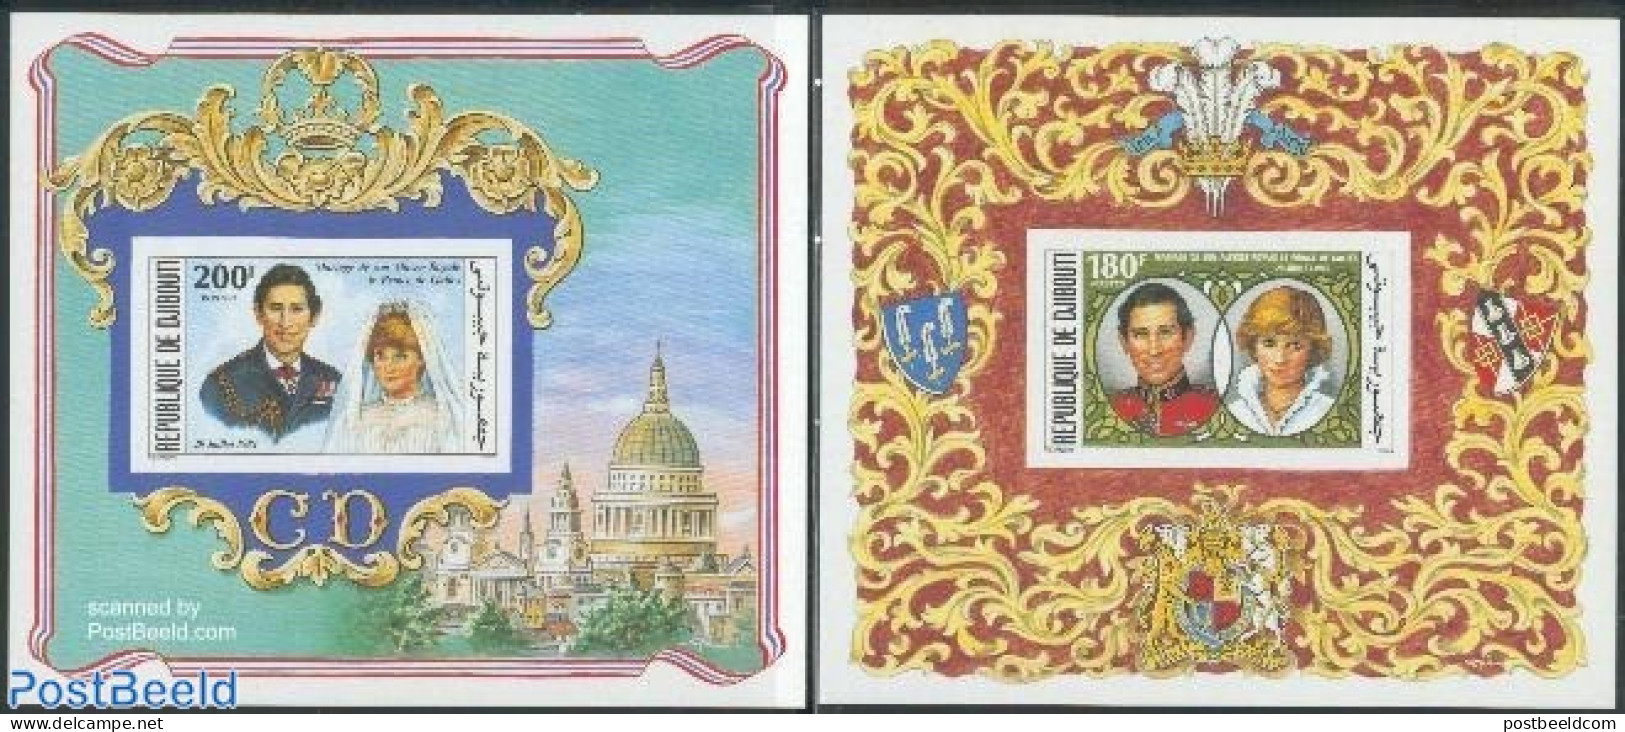 Djibouti 1981 Charles & Diana Wedding 2 S/s Imperforated, Mint NH, History - Charles & Diana - Kings & Queens (Royalty) - Royalties, Royals